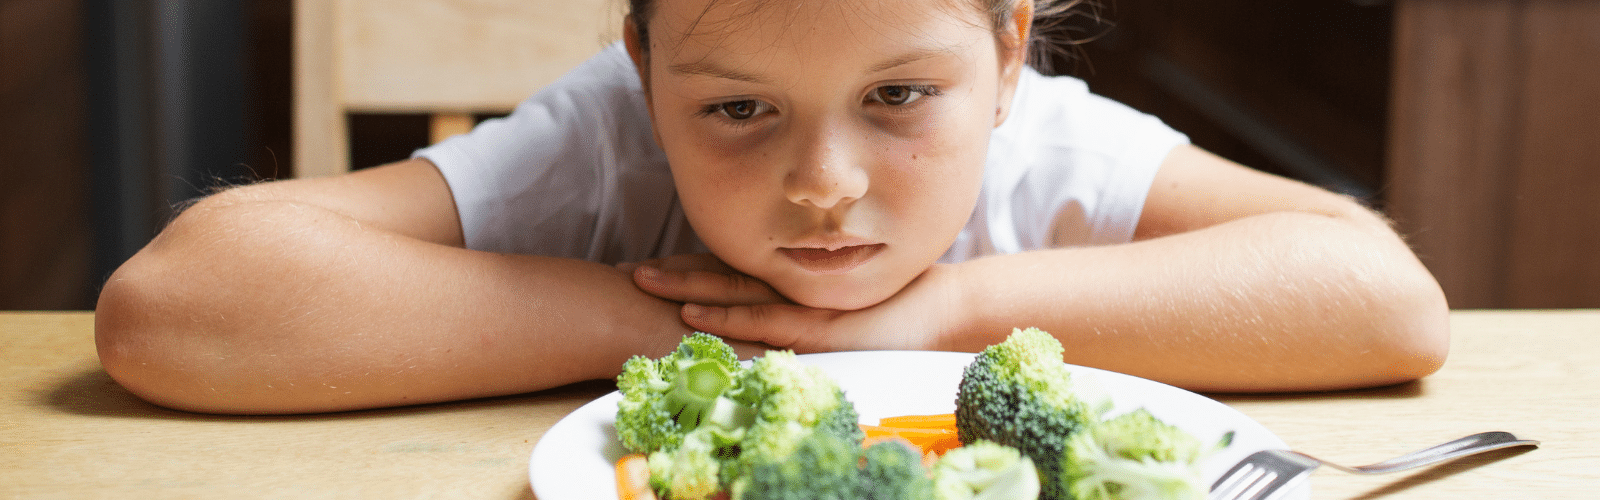 My child refuses to eat, what should I do?